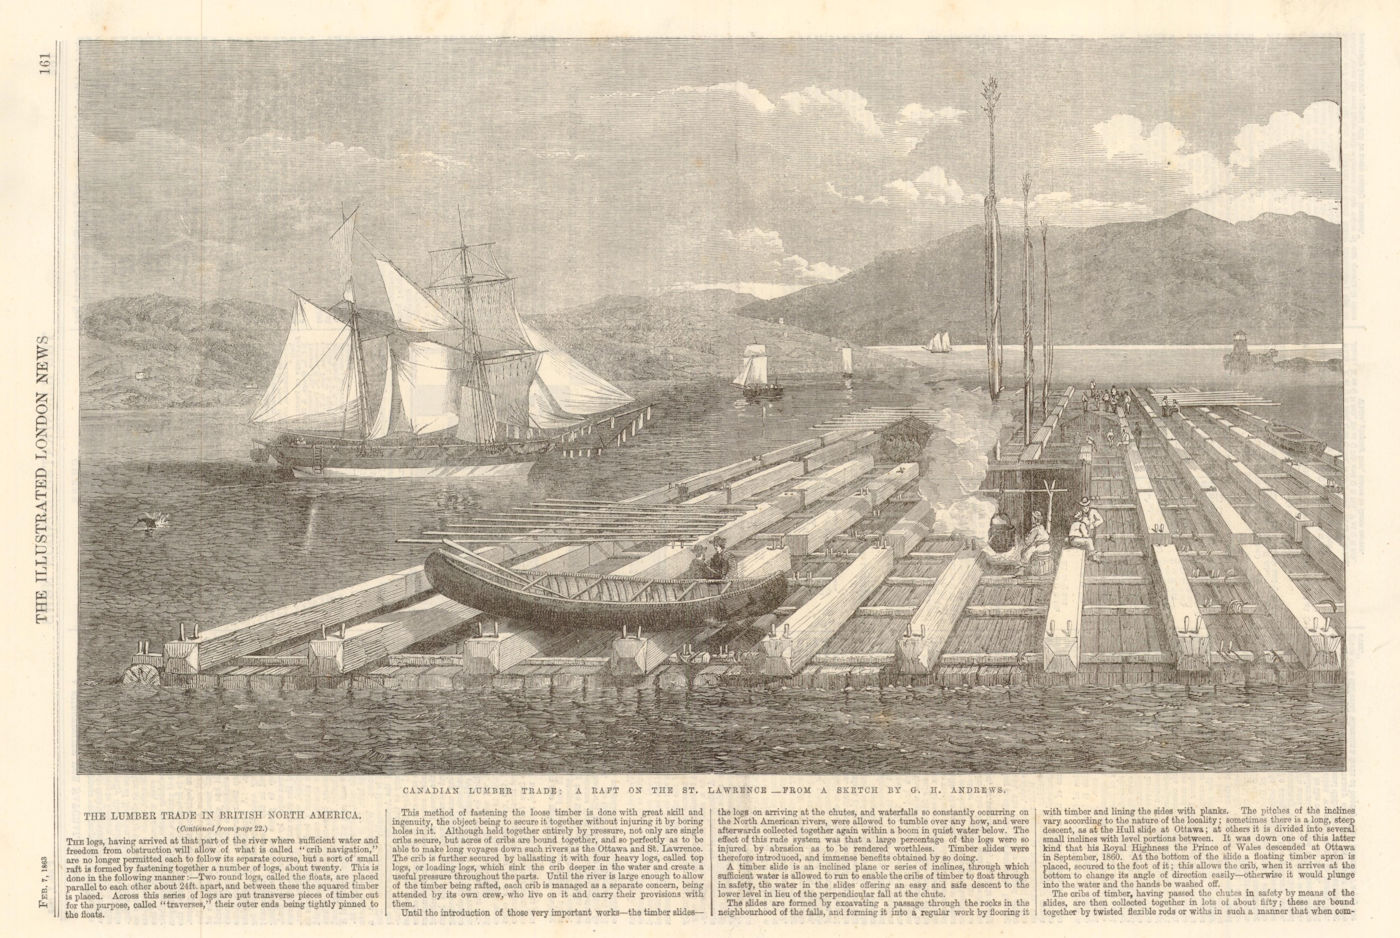 Associate Product Canadian Lumber trade: A raft on the St. Lawrence. Ships 1863 old print